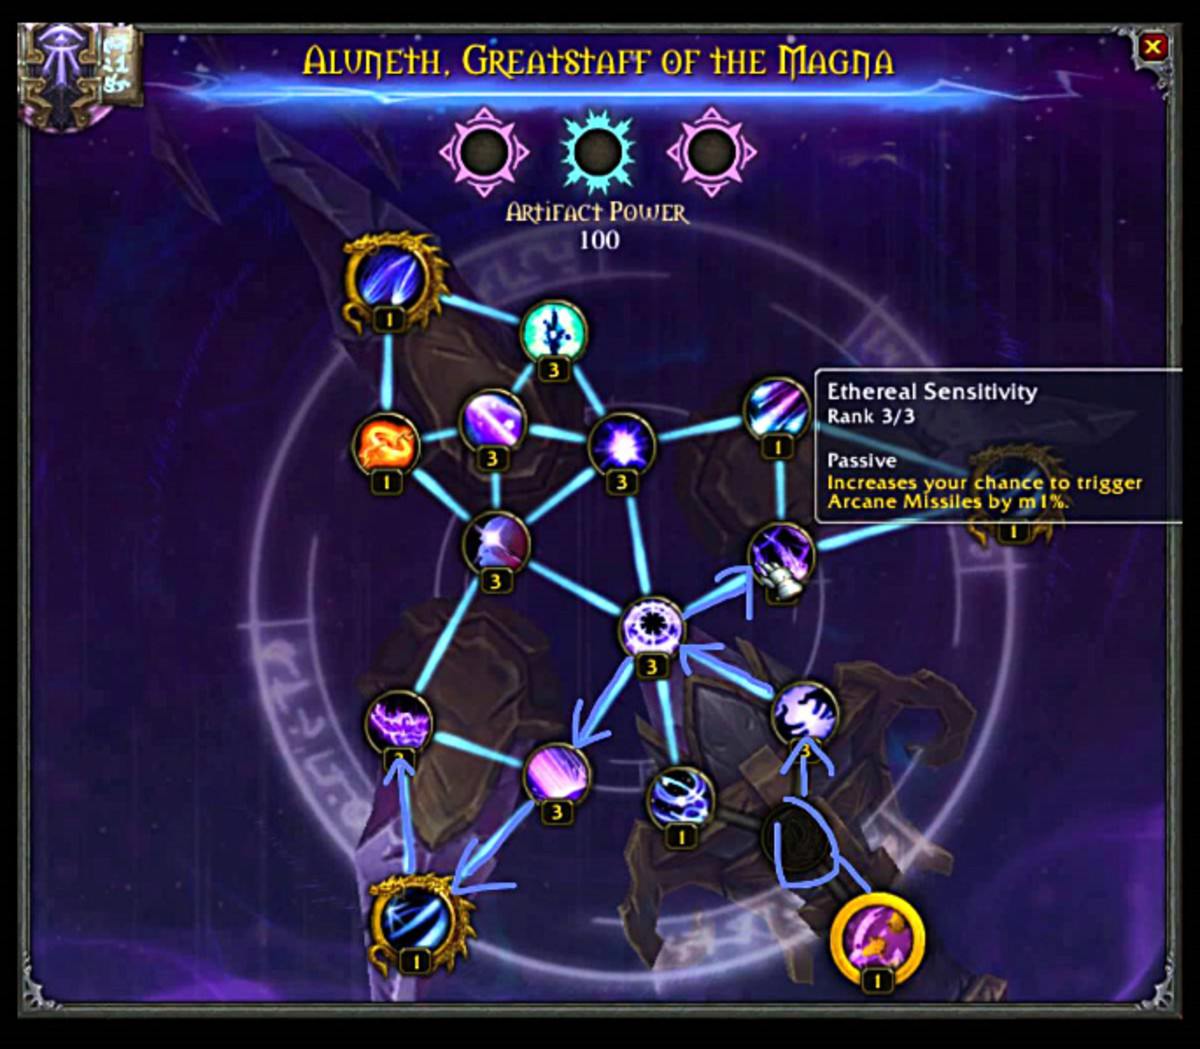 The trait tree for my arcane mage artifact. Notice how different it is from that of Ashbringer's.